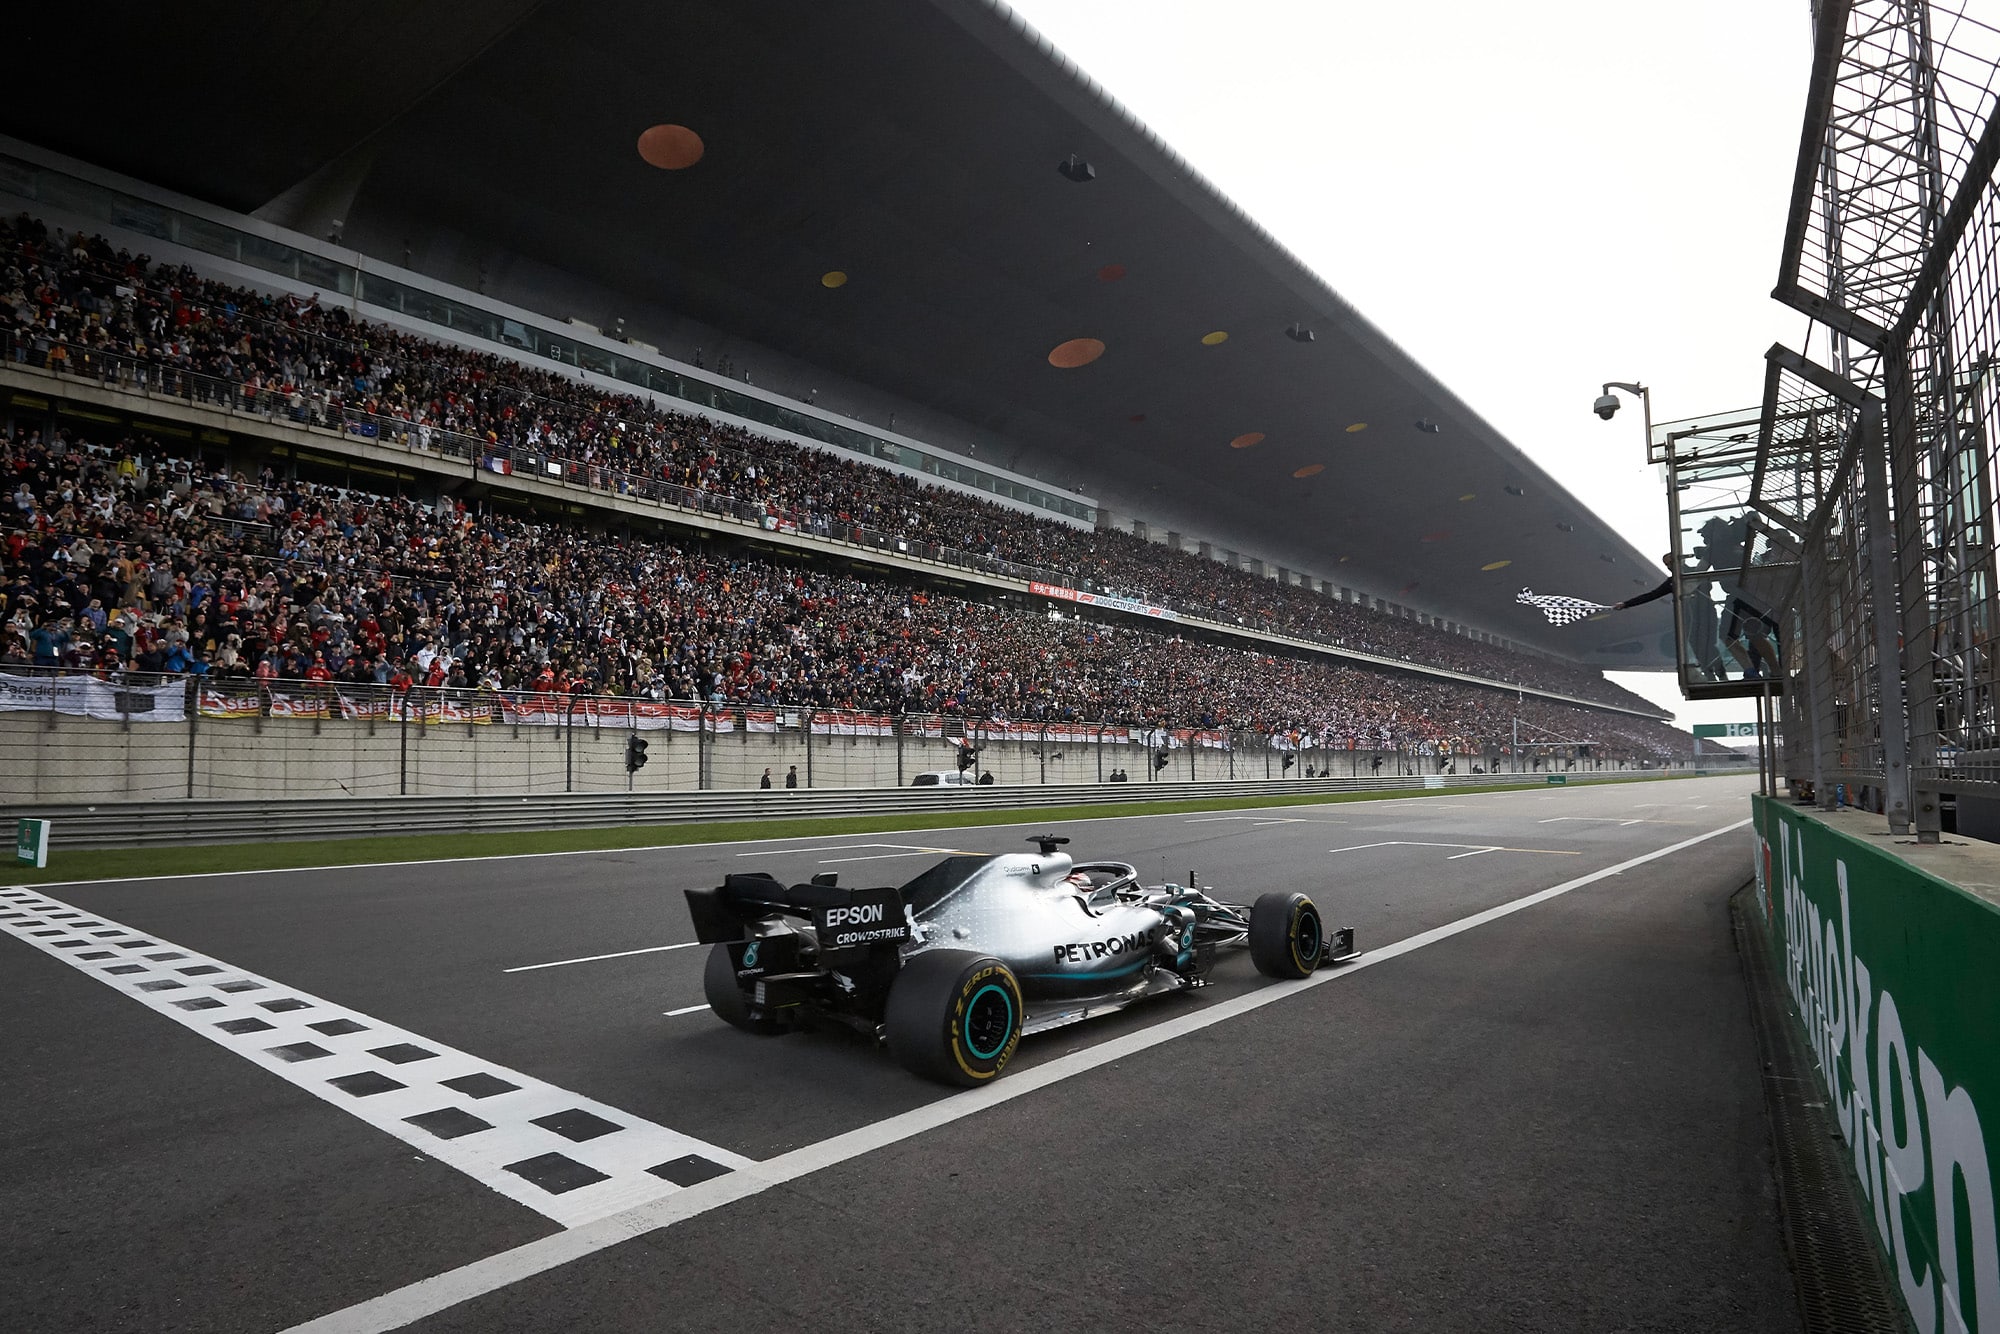 Lewis Hamilton crosses the line to win the 2019 Chinese Grand Prix